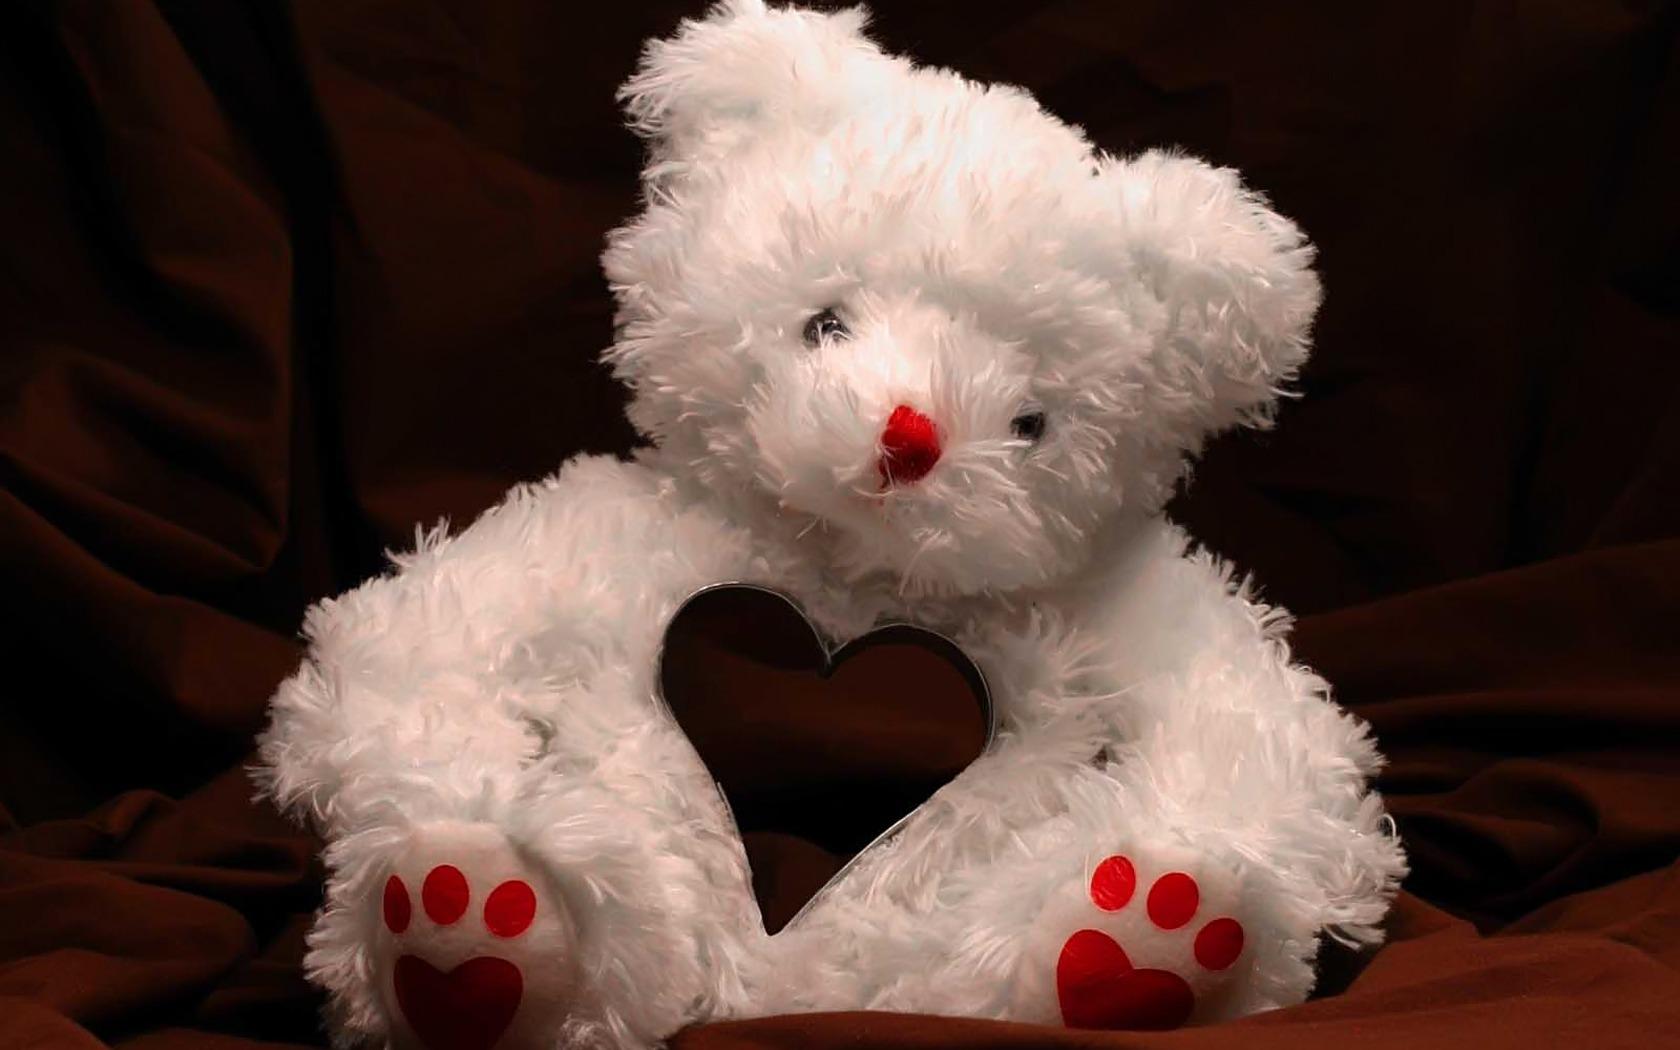 Valentine s Teddy Bear Wallpaper Valentines Day Holidays Wallpaper in jpg format for free download